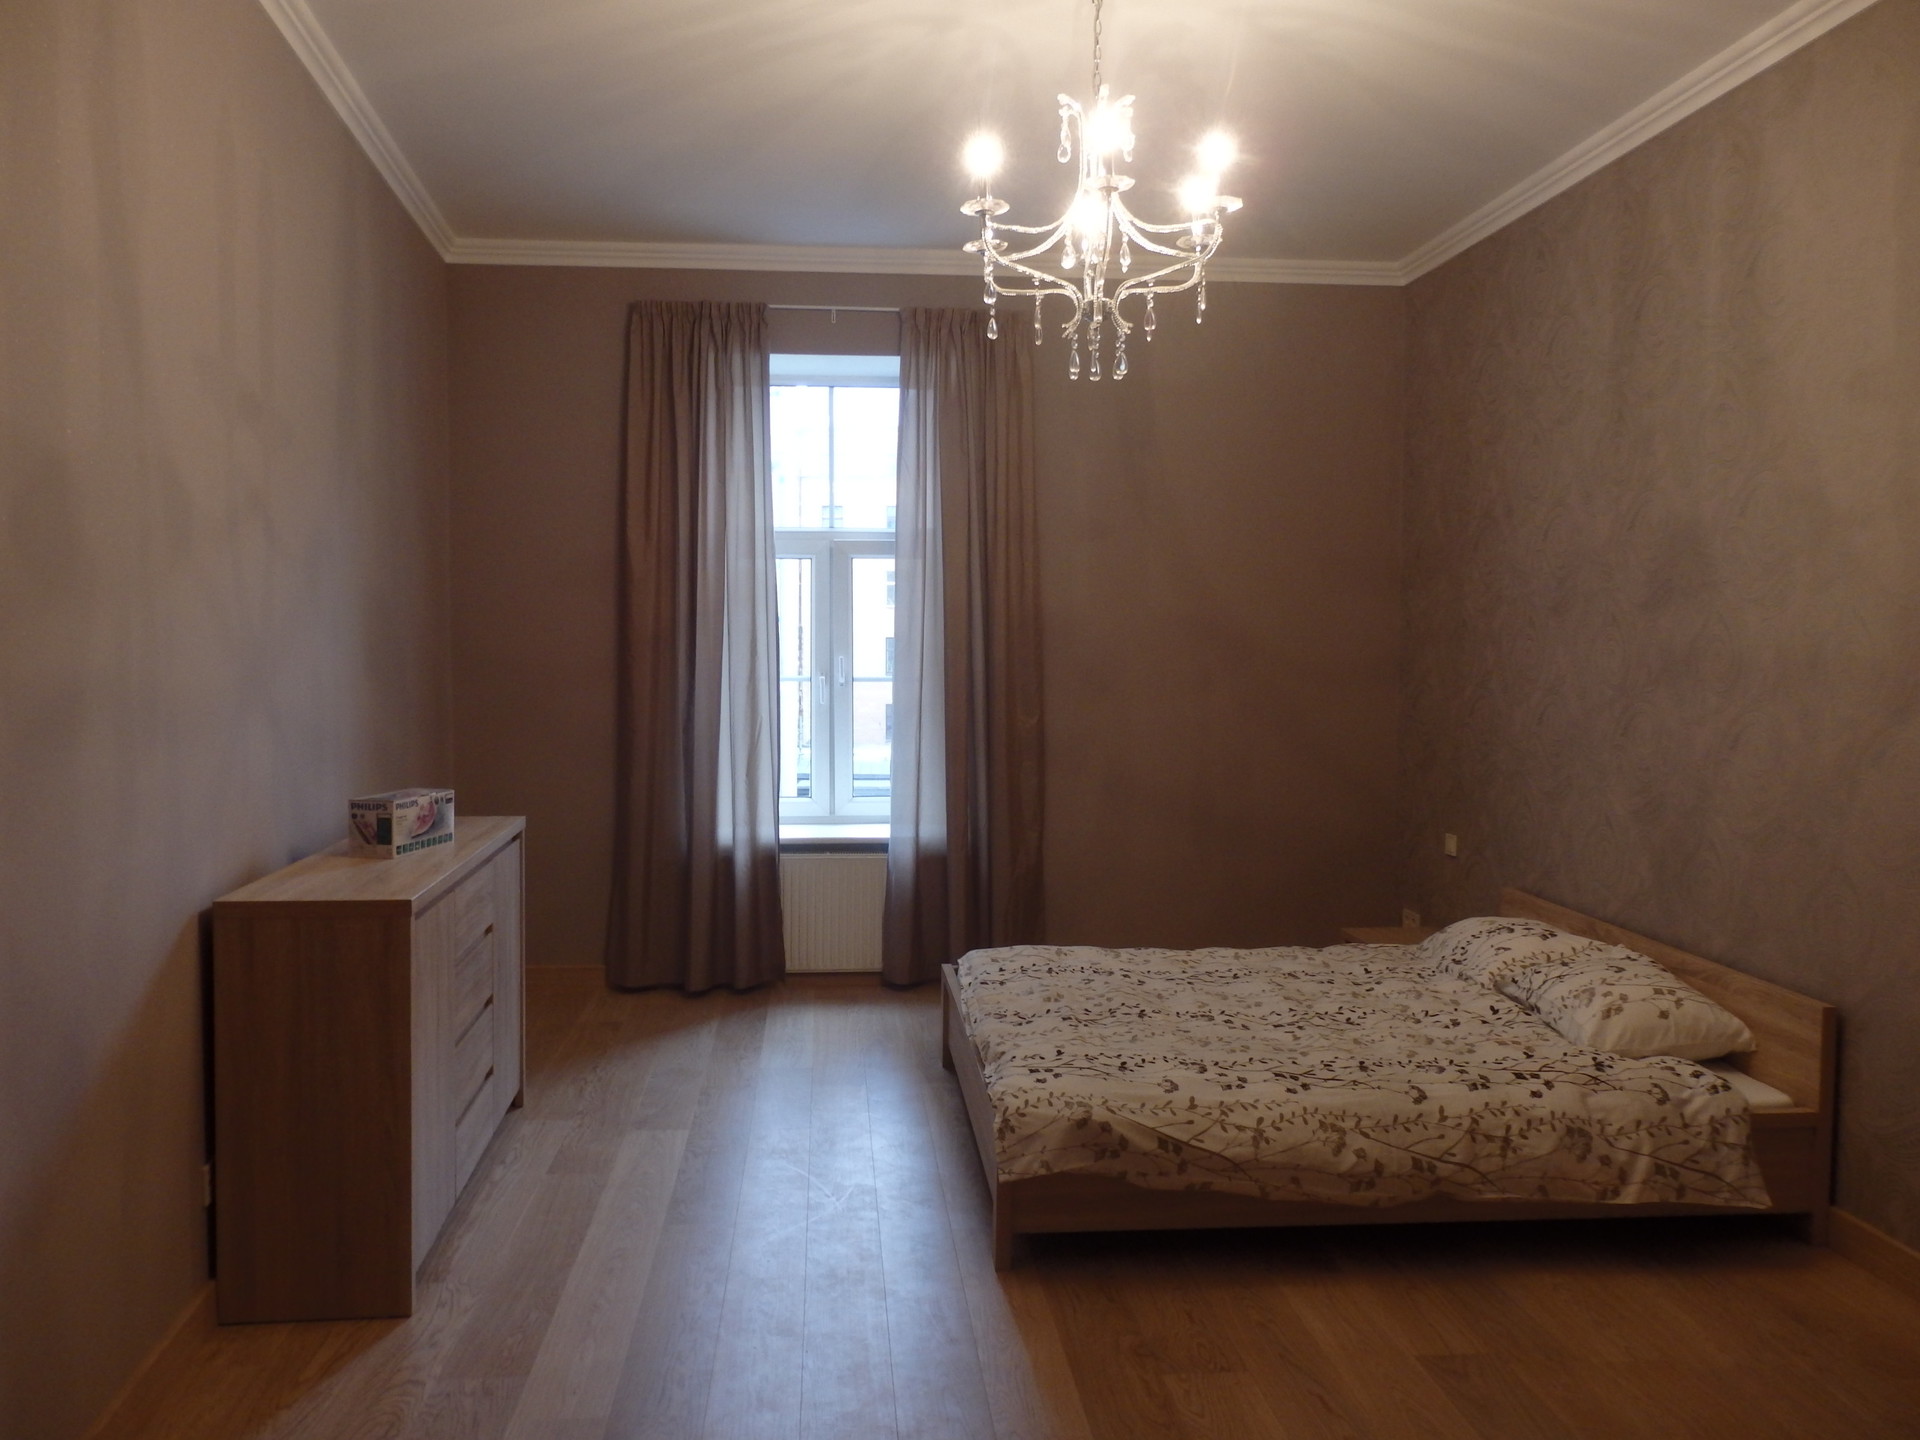 From 01 09 We Offer For Rent Great Two Rooms Flat With All